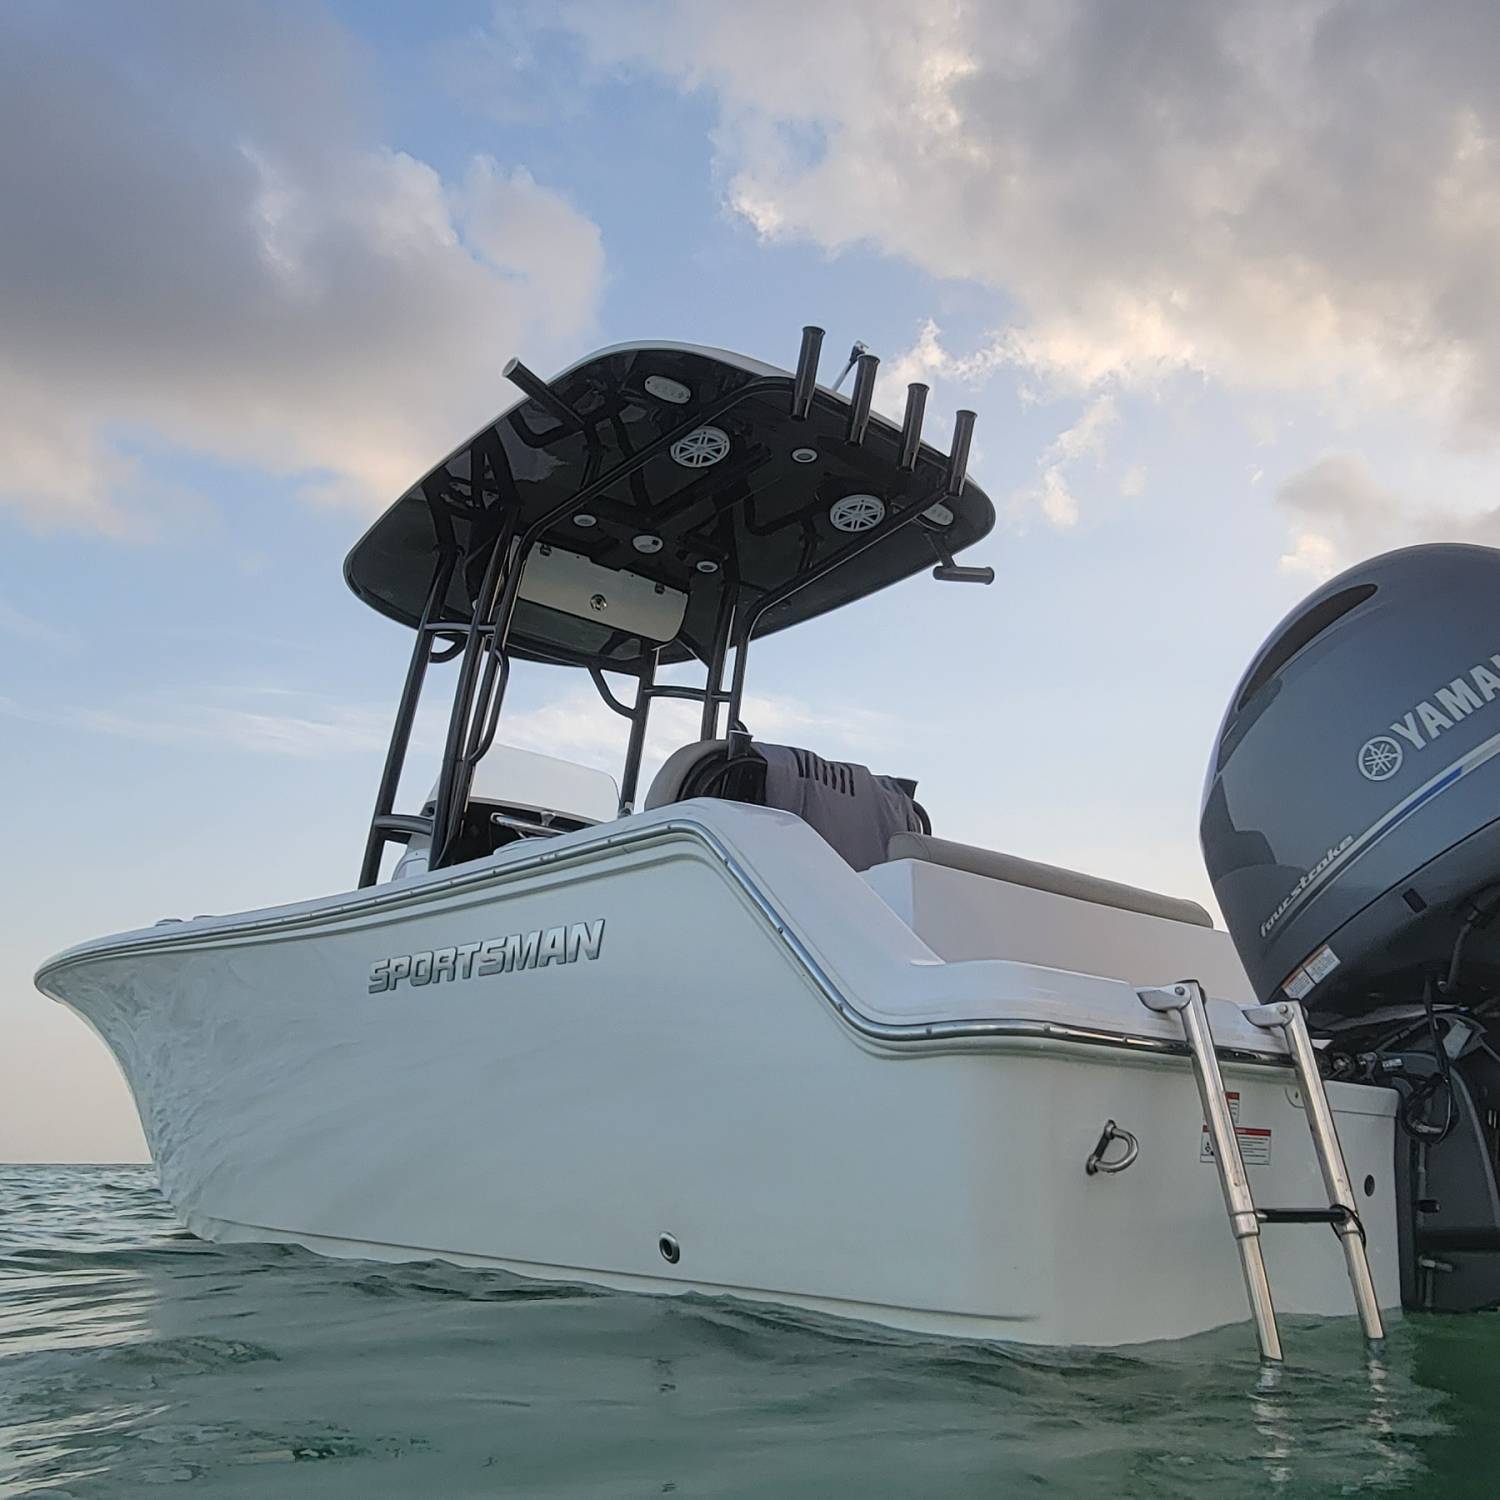 Title: Beach time - On board their Sportsman Open 212 Center Console - Location: Bahia honda. Participating in the Photo Contest #SportsmanSeptember2021